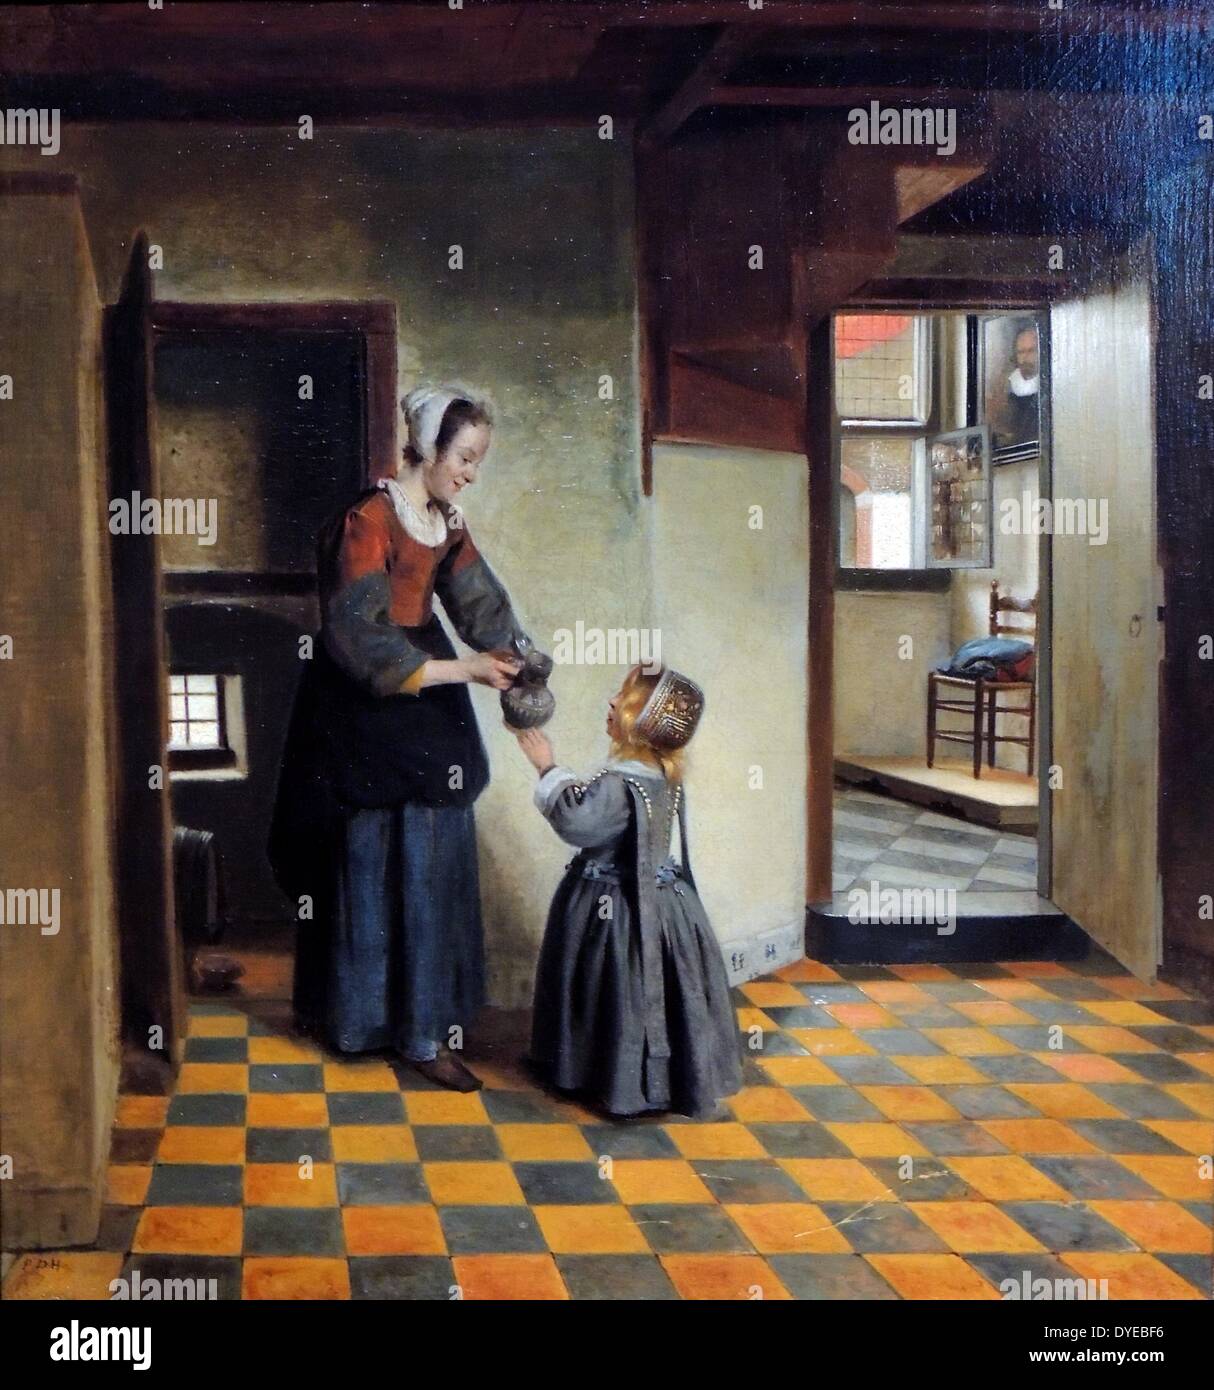 Woman with a Child in a Pantry, Pieter de Hooch (1629 - ca.1683) oil on canvas c. 1656-1660. Pieter de Hooch worked in Delft for a few years at the same time as Johannes Vermeer. Both artists were fascinated by how to render light and space. Stock Photo